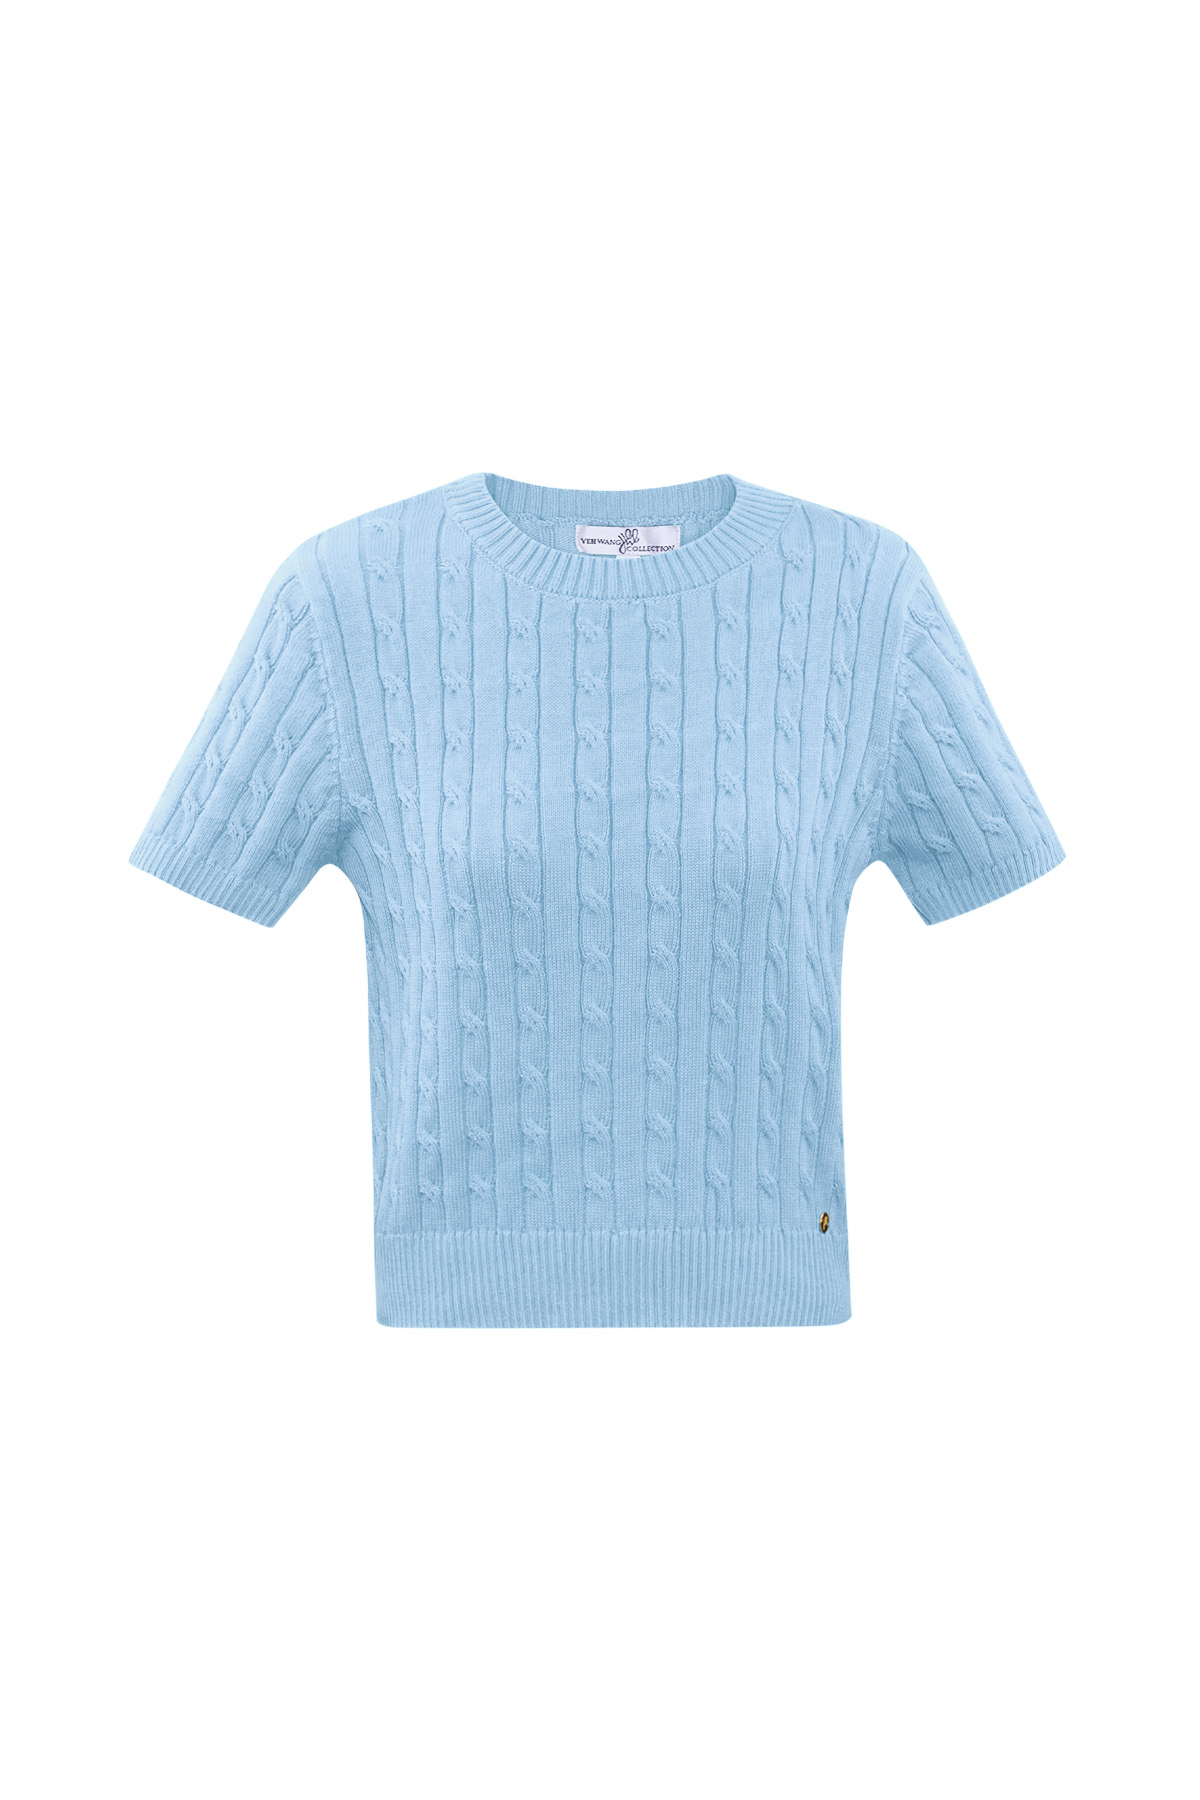 Knitted sweater with cables and short sleeves small/medium – light blue